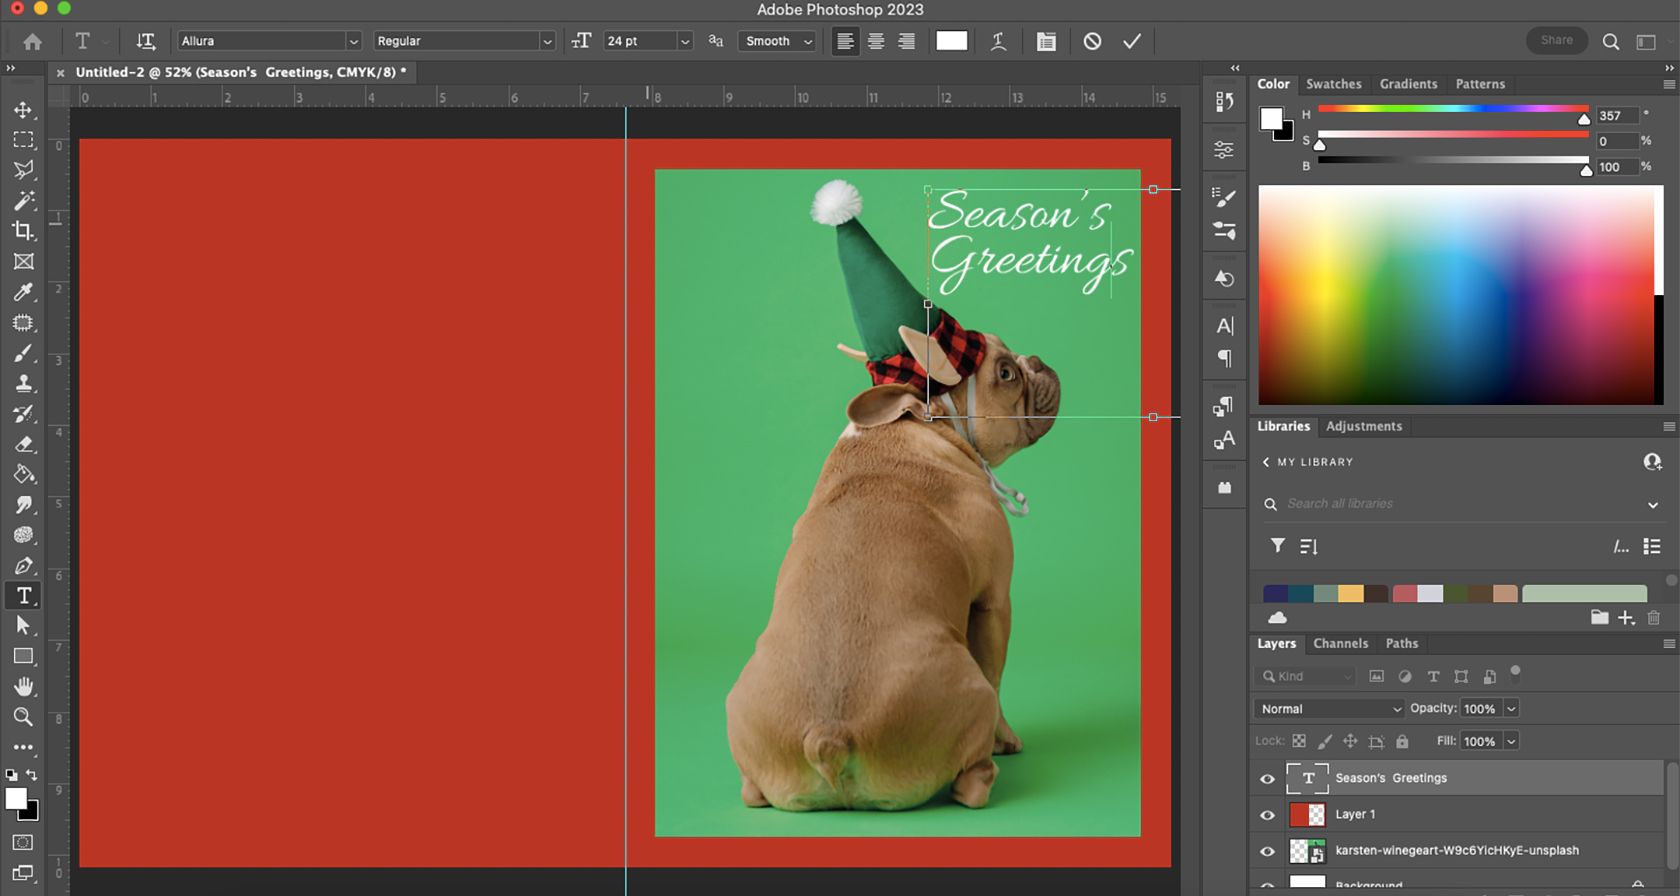 Christmas card design in Photoshop with Season's Greetings text.